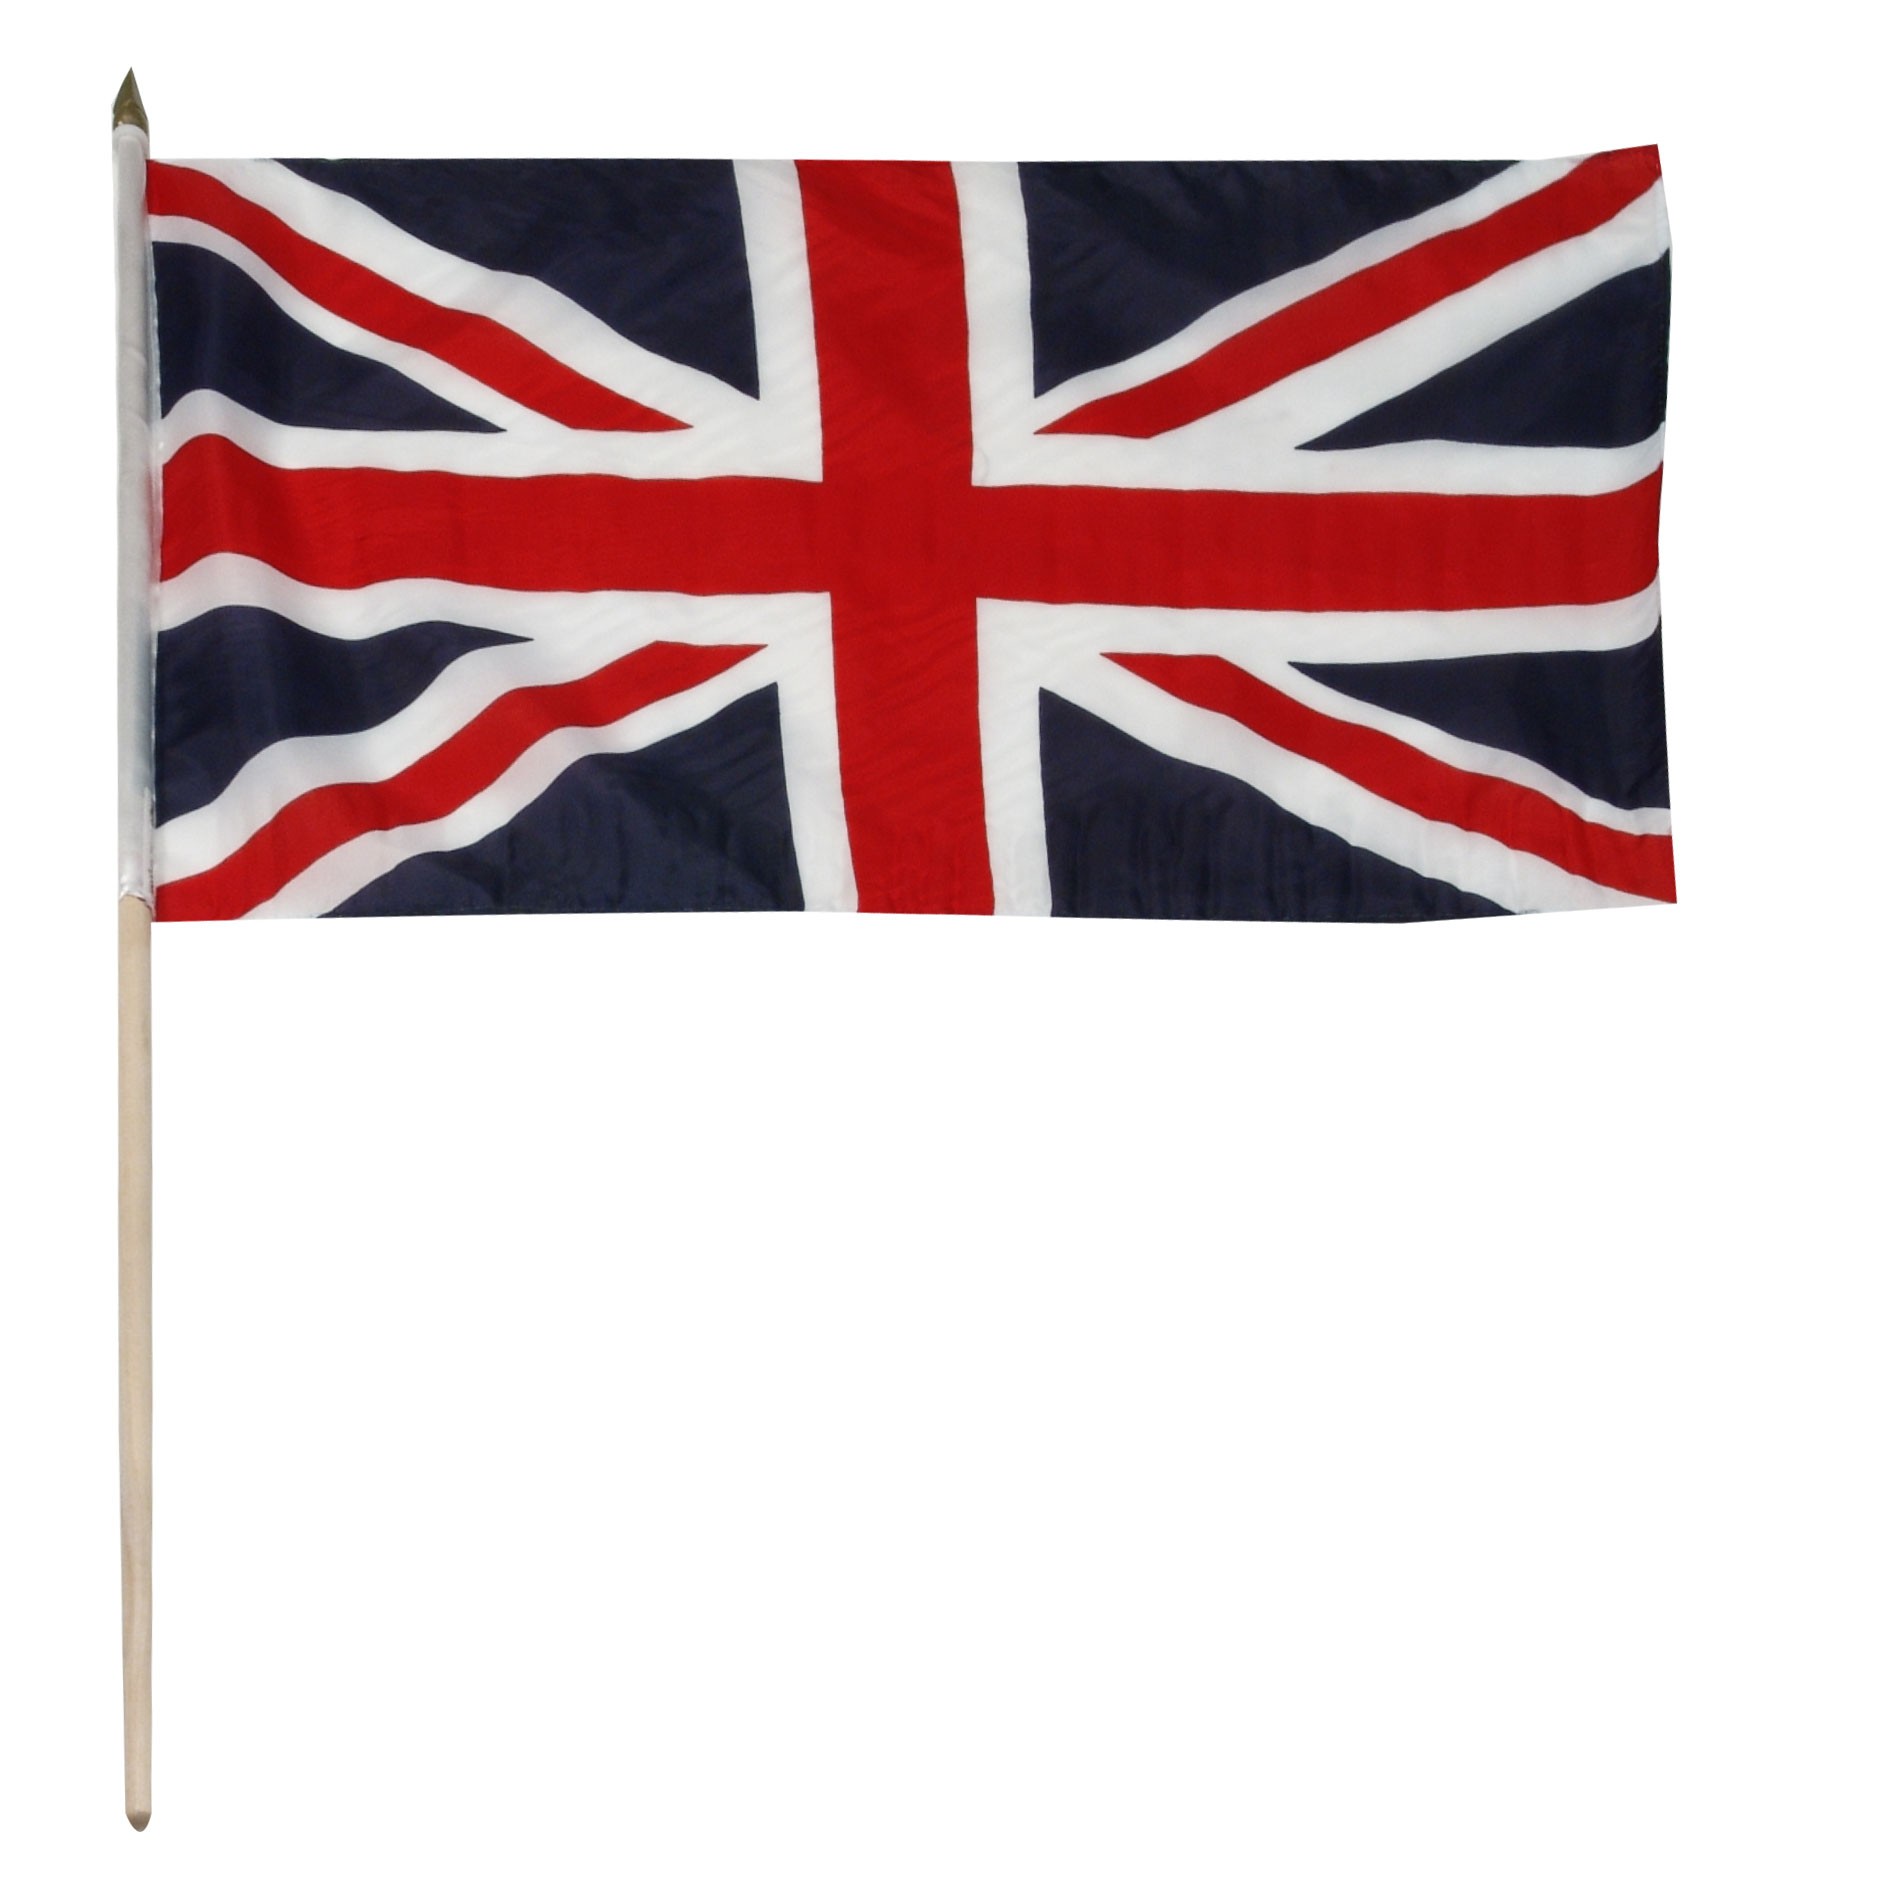 Picture Of British Flag   Clipart Best